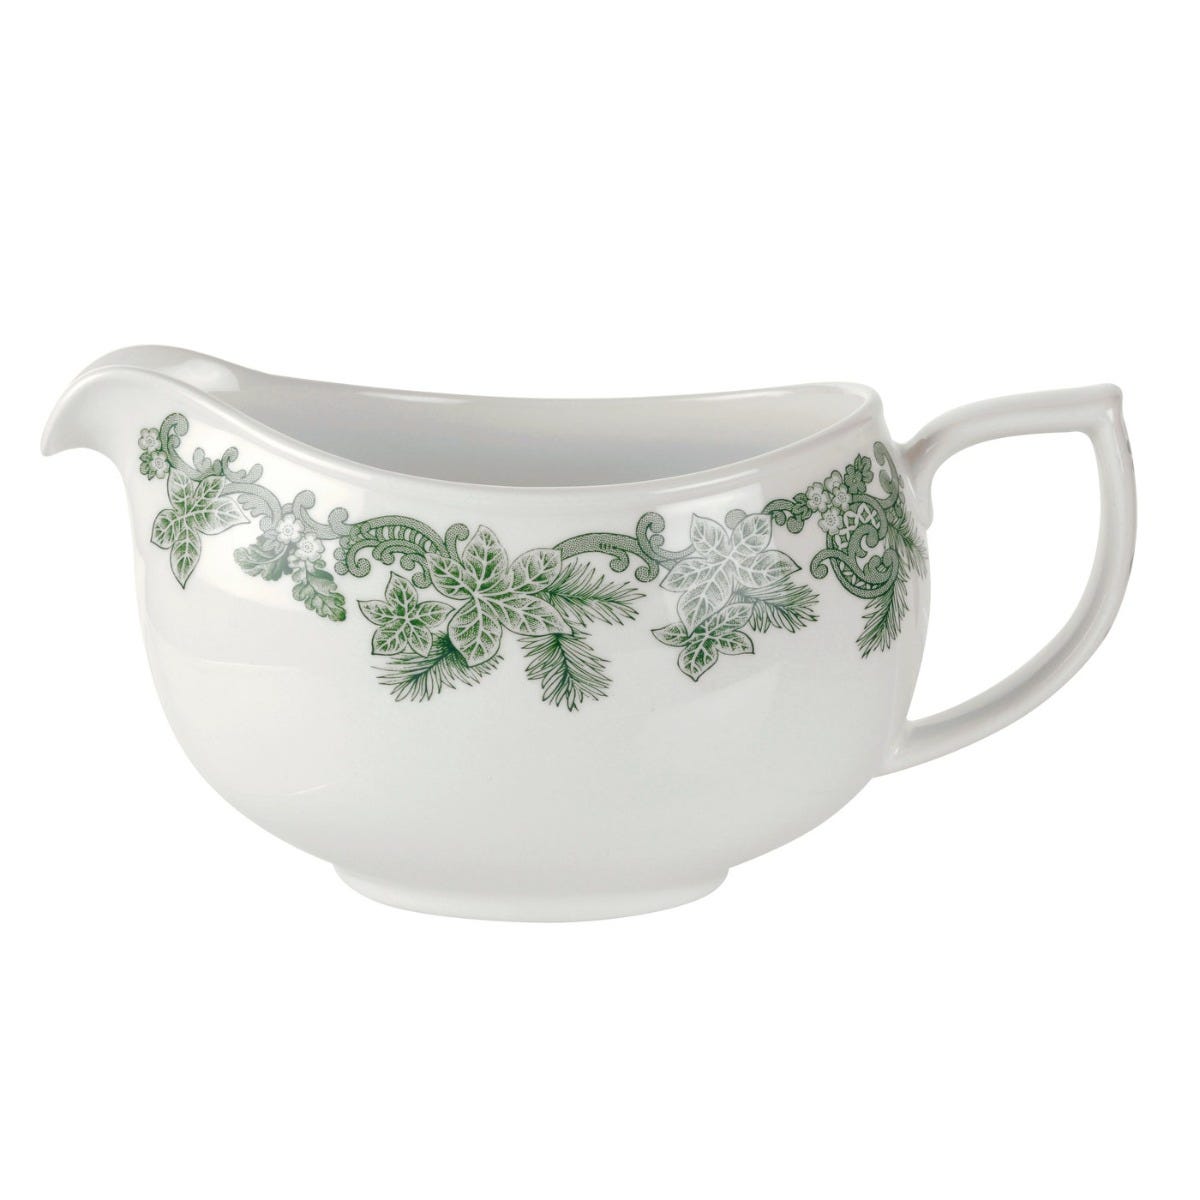 Seconds Spode Ruskin House Wreath Sauce Boat